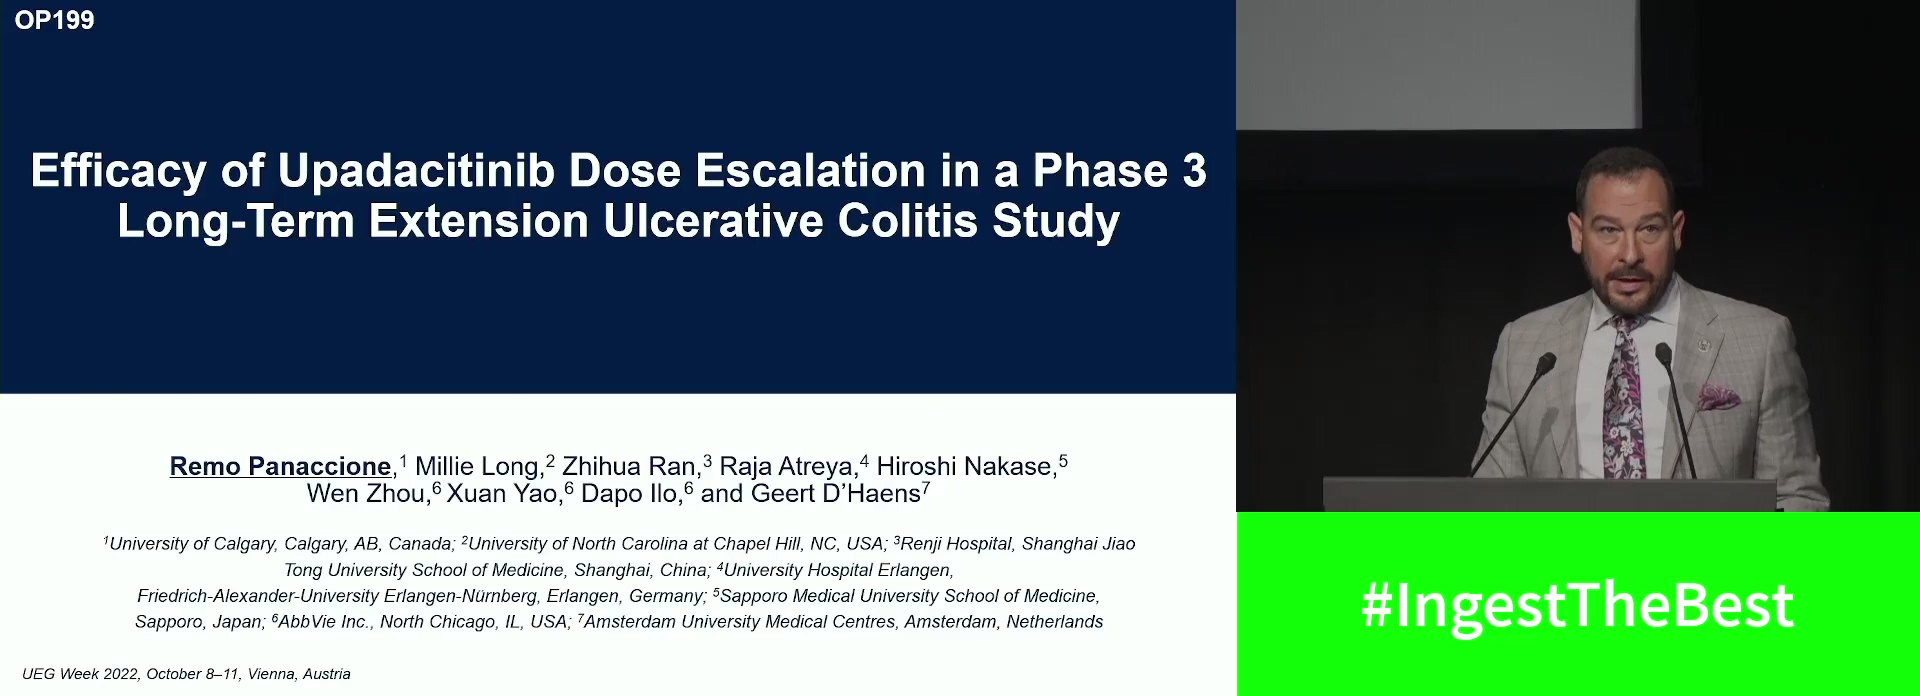 EFFICACY OF UPADACITINIB DOSE ESCALATION IN A PHASE 3 LONG-TERM EXTENSION ULCERATIVE COLITIS STUDY